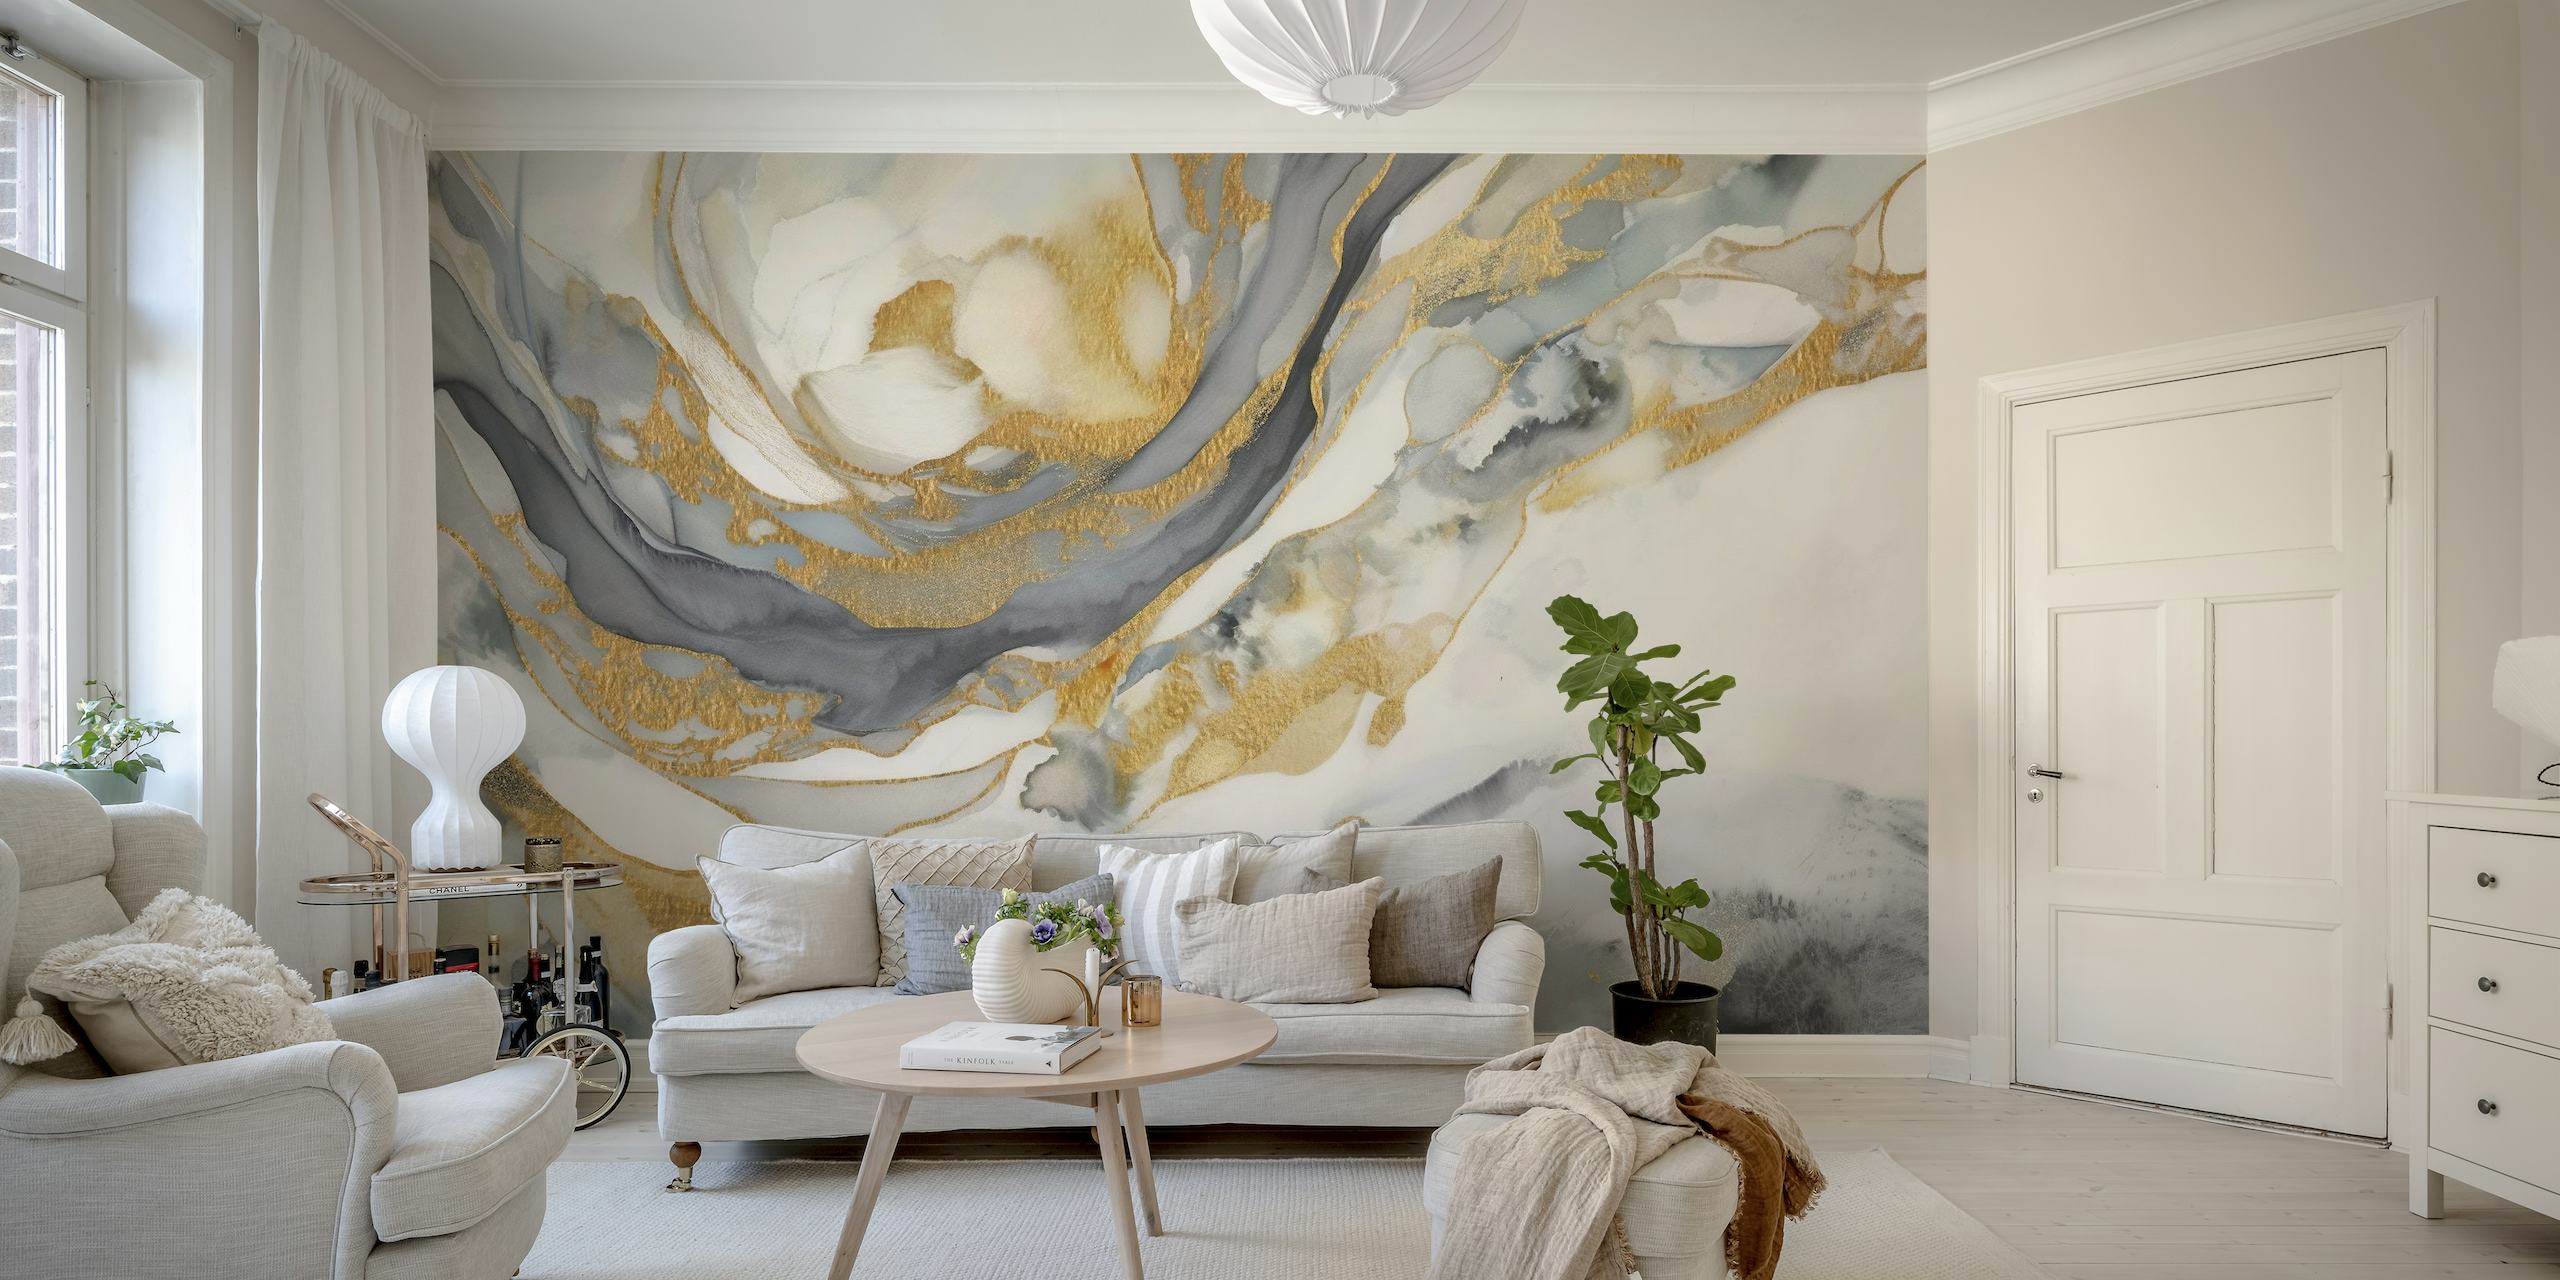 Abstract wall mural with swirling gold, gray, and white marble patterns